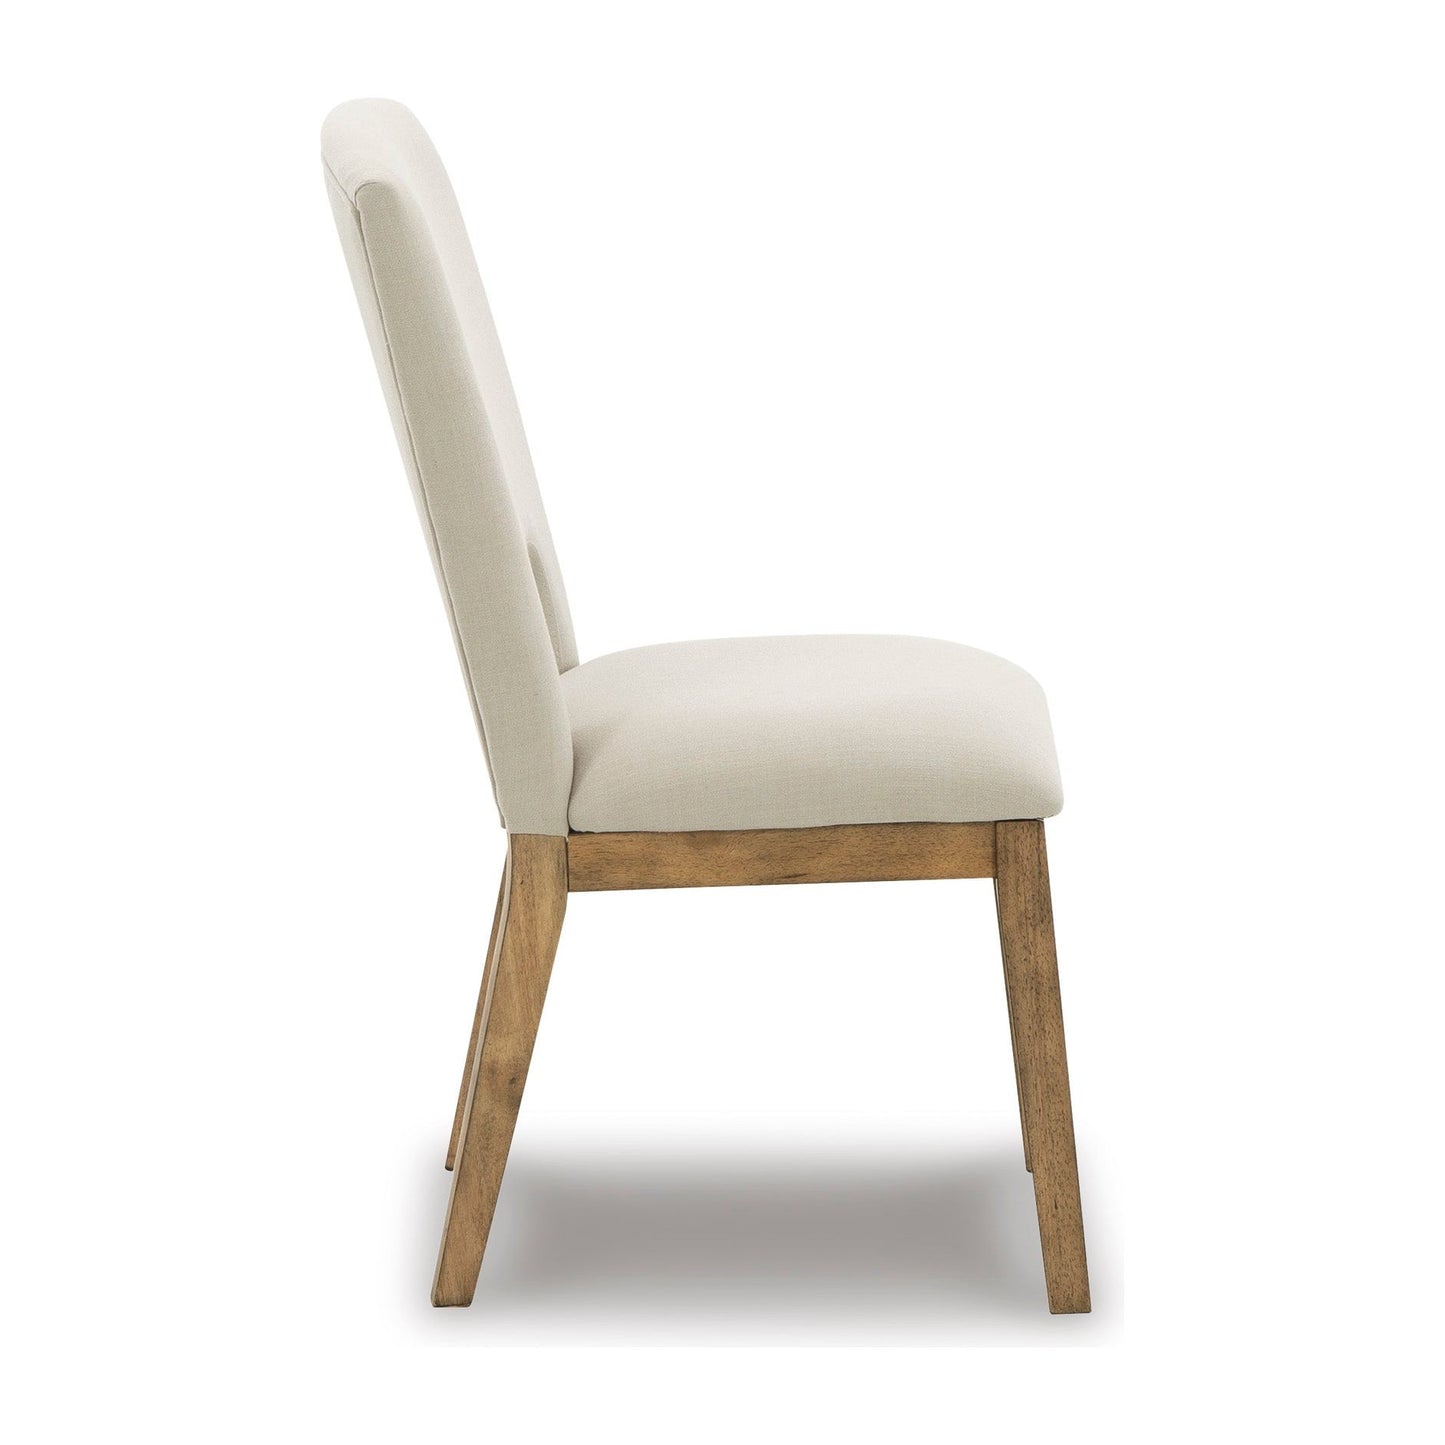 DAKMORE DINING CHAIR - BROWN